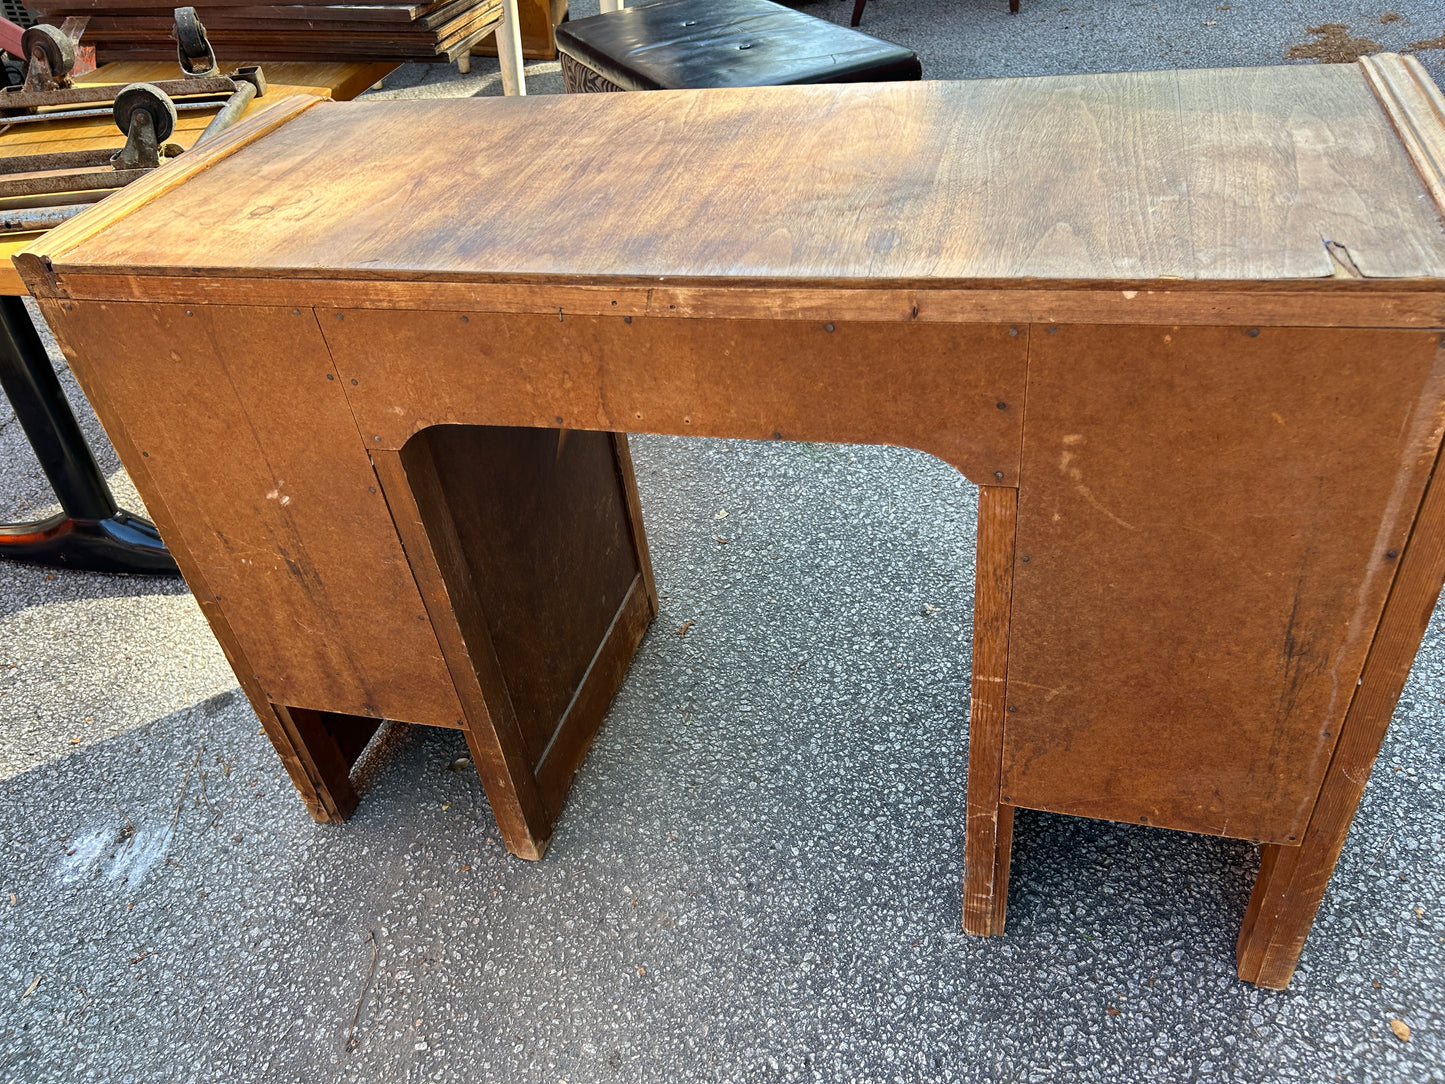 Antique Solid Wood Desk with a total of four drawers